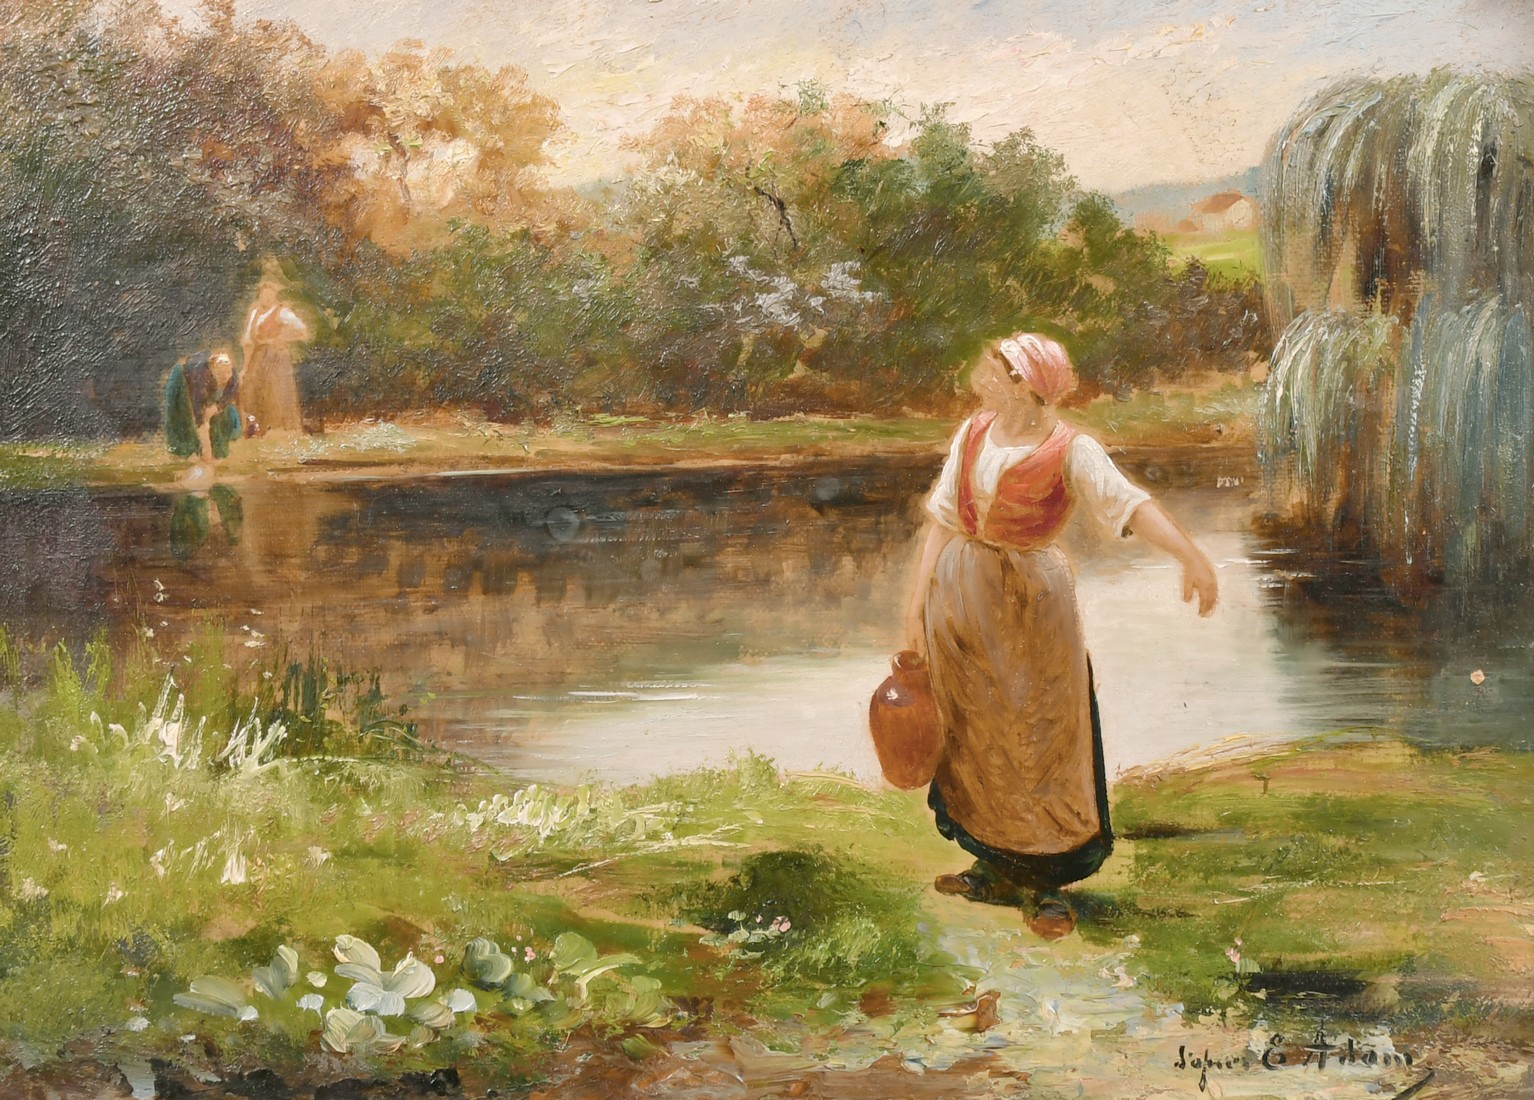 Late 19th century French school, Washerwoman collecting water, oil on canvas, indistinctly signed '